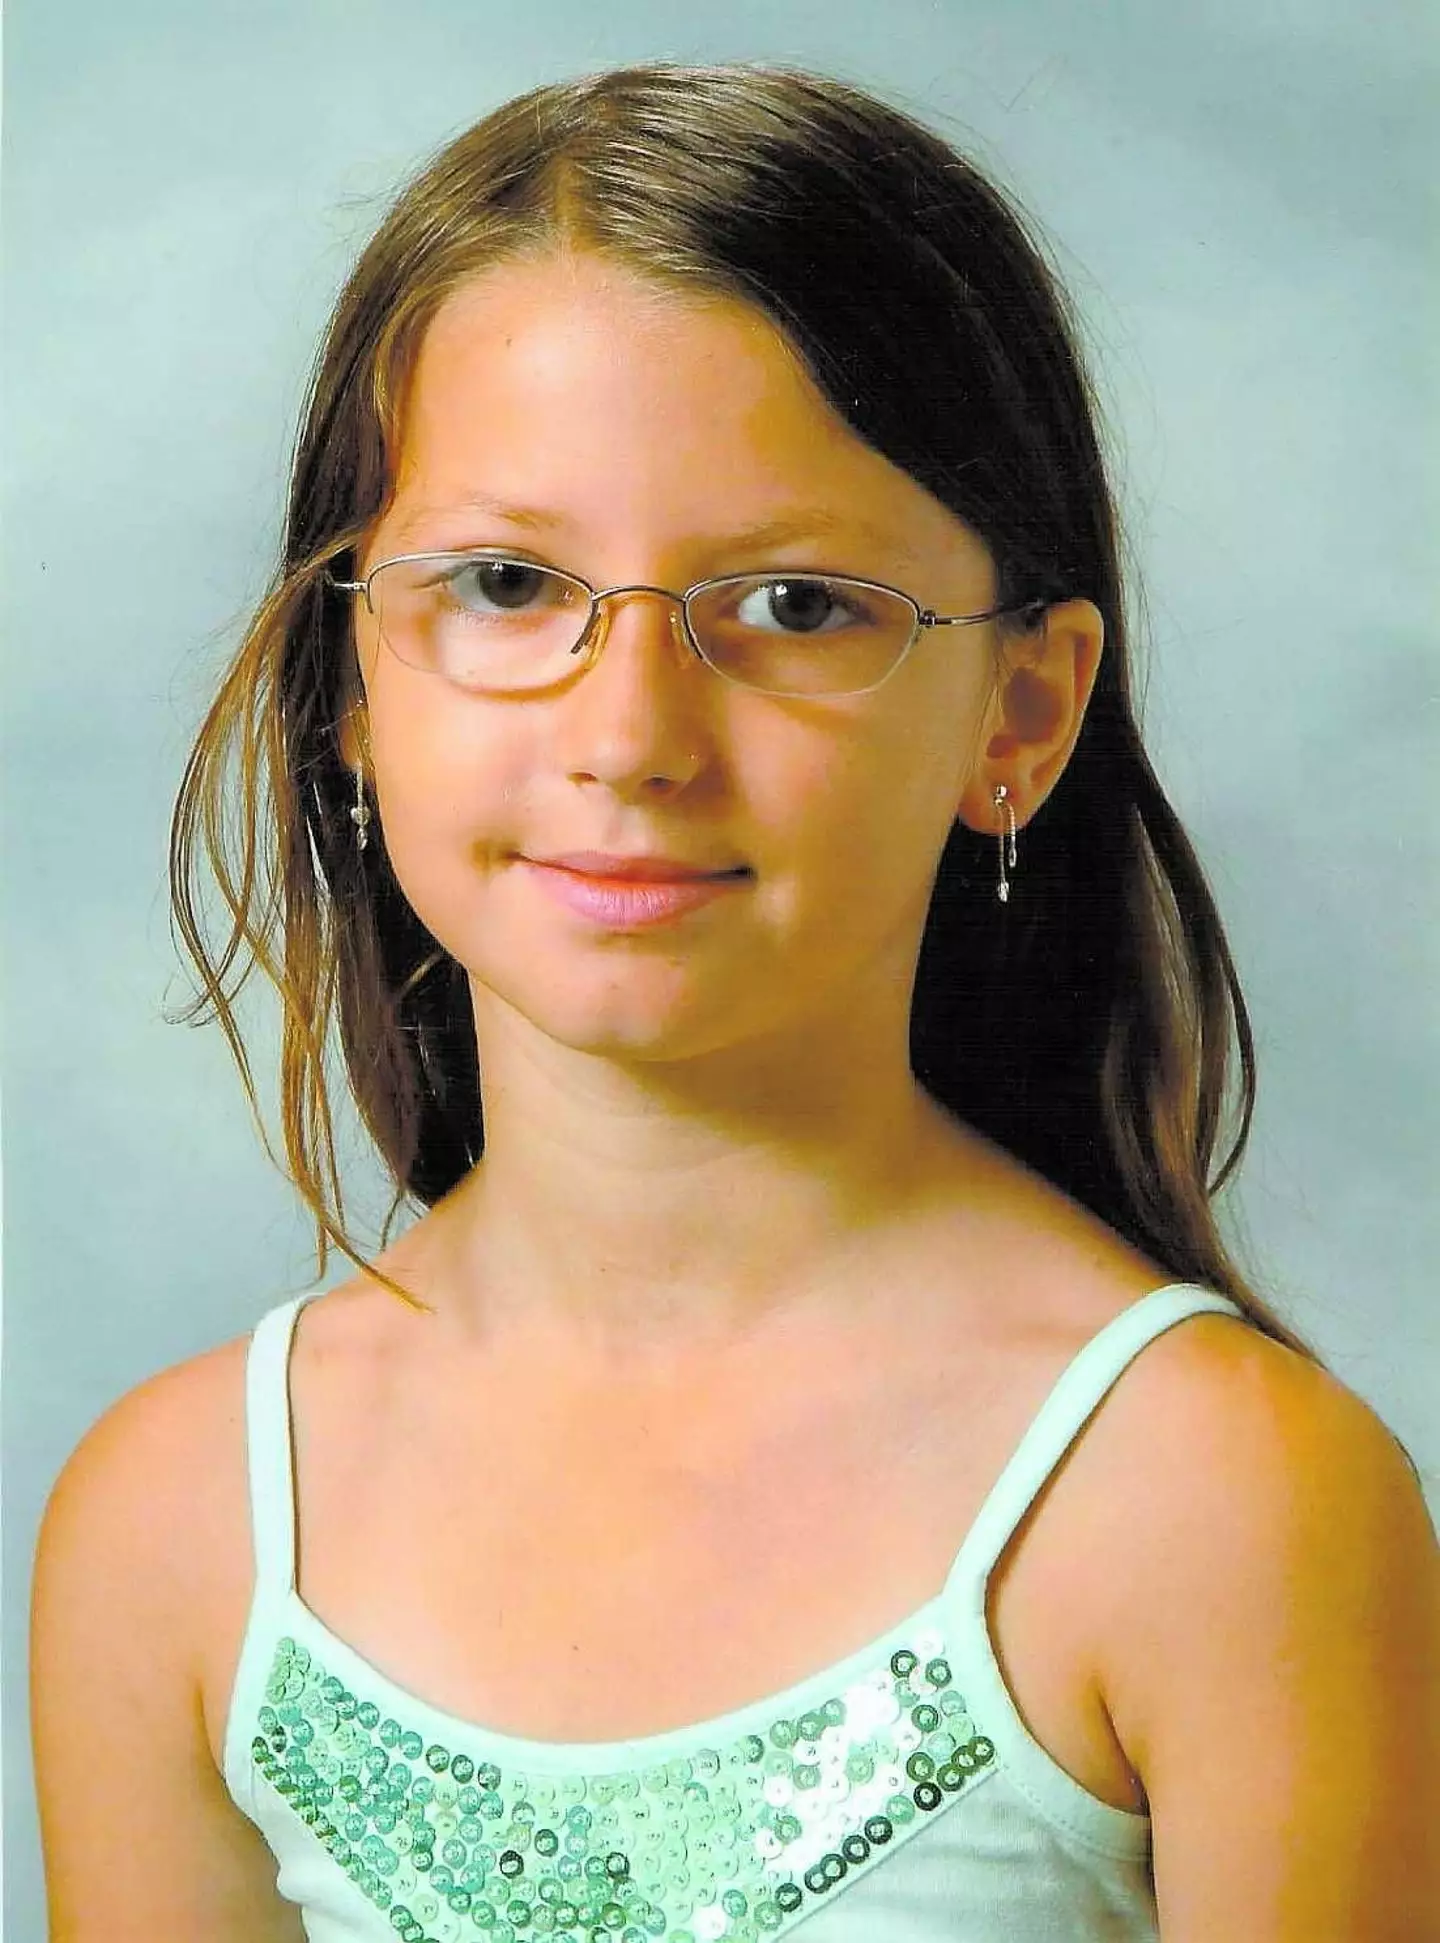 Engla Höglund went missing on 5 April, 2008. (Family handout) 